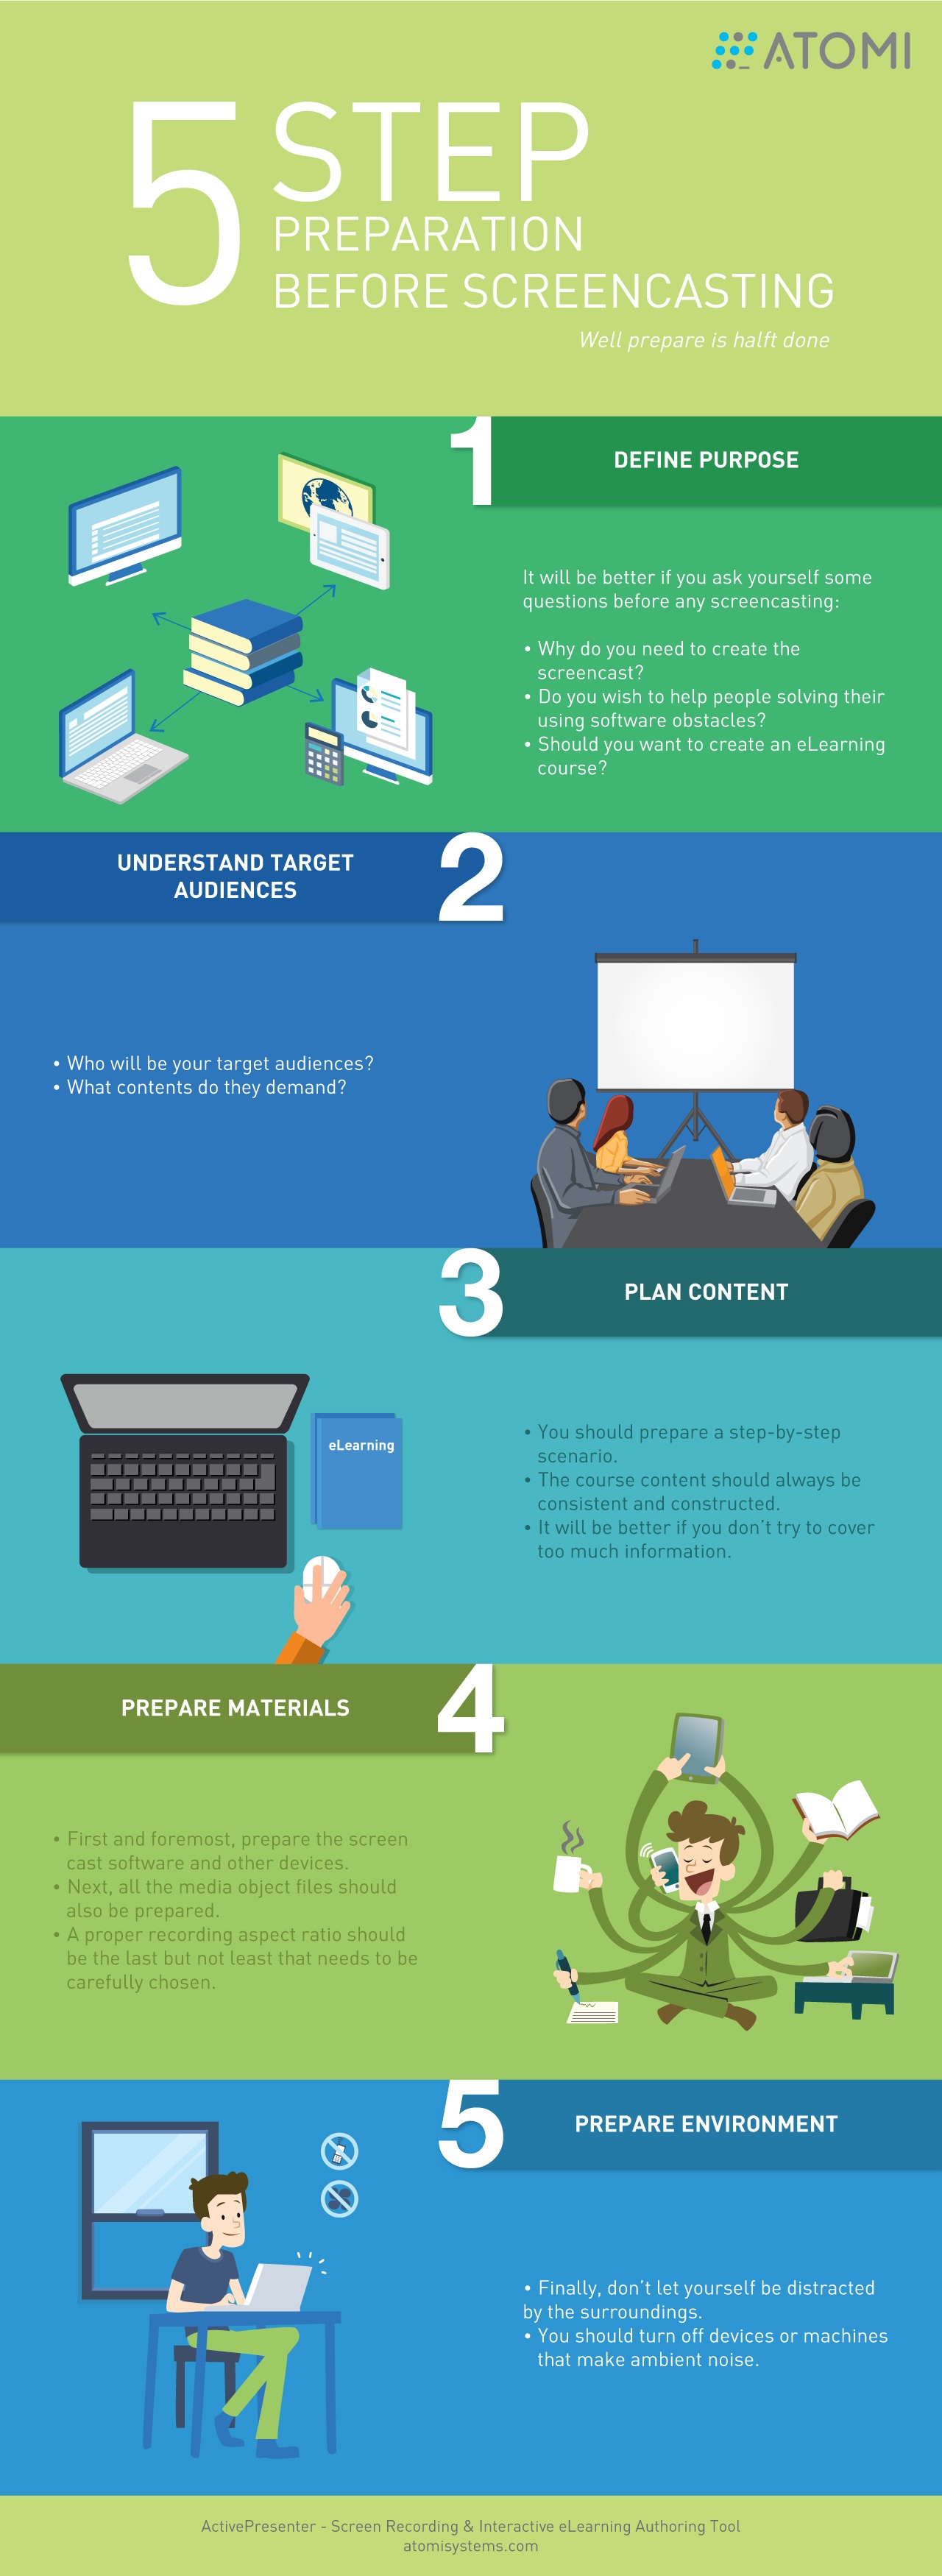 5 Step Preparation Before a Screencast Infographic